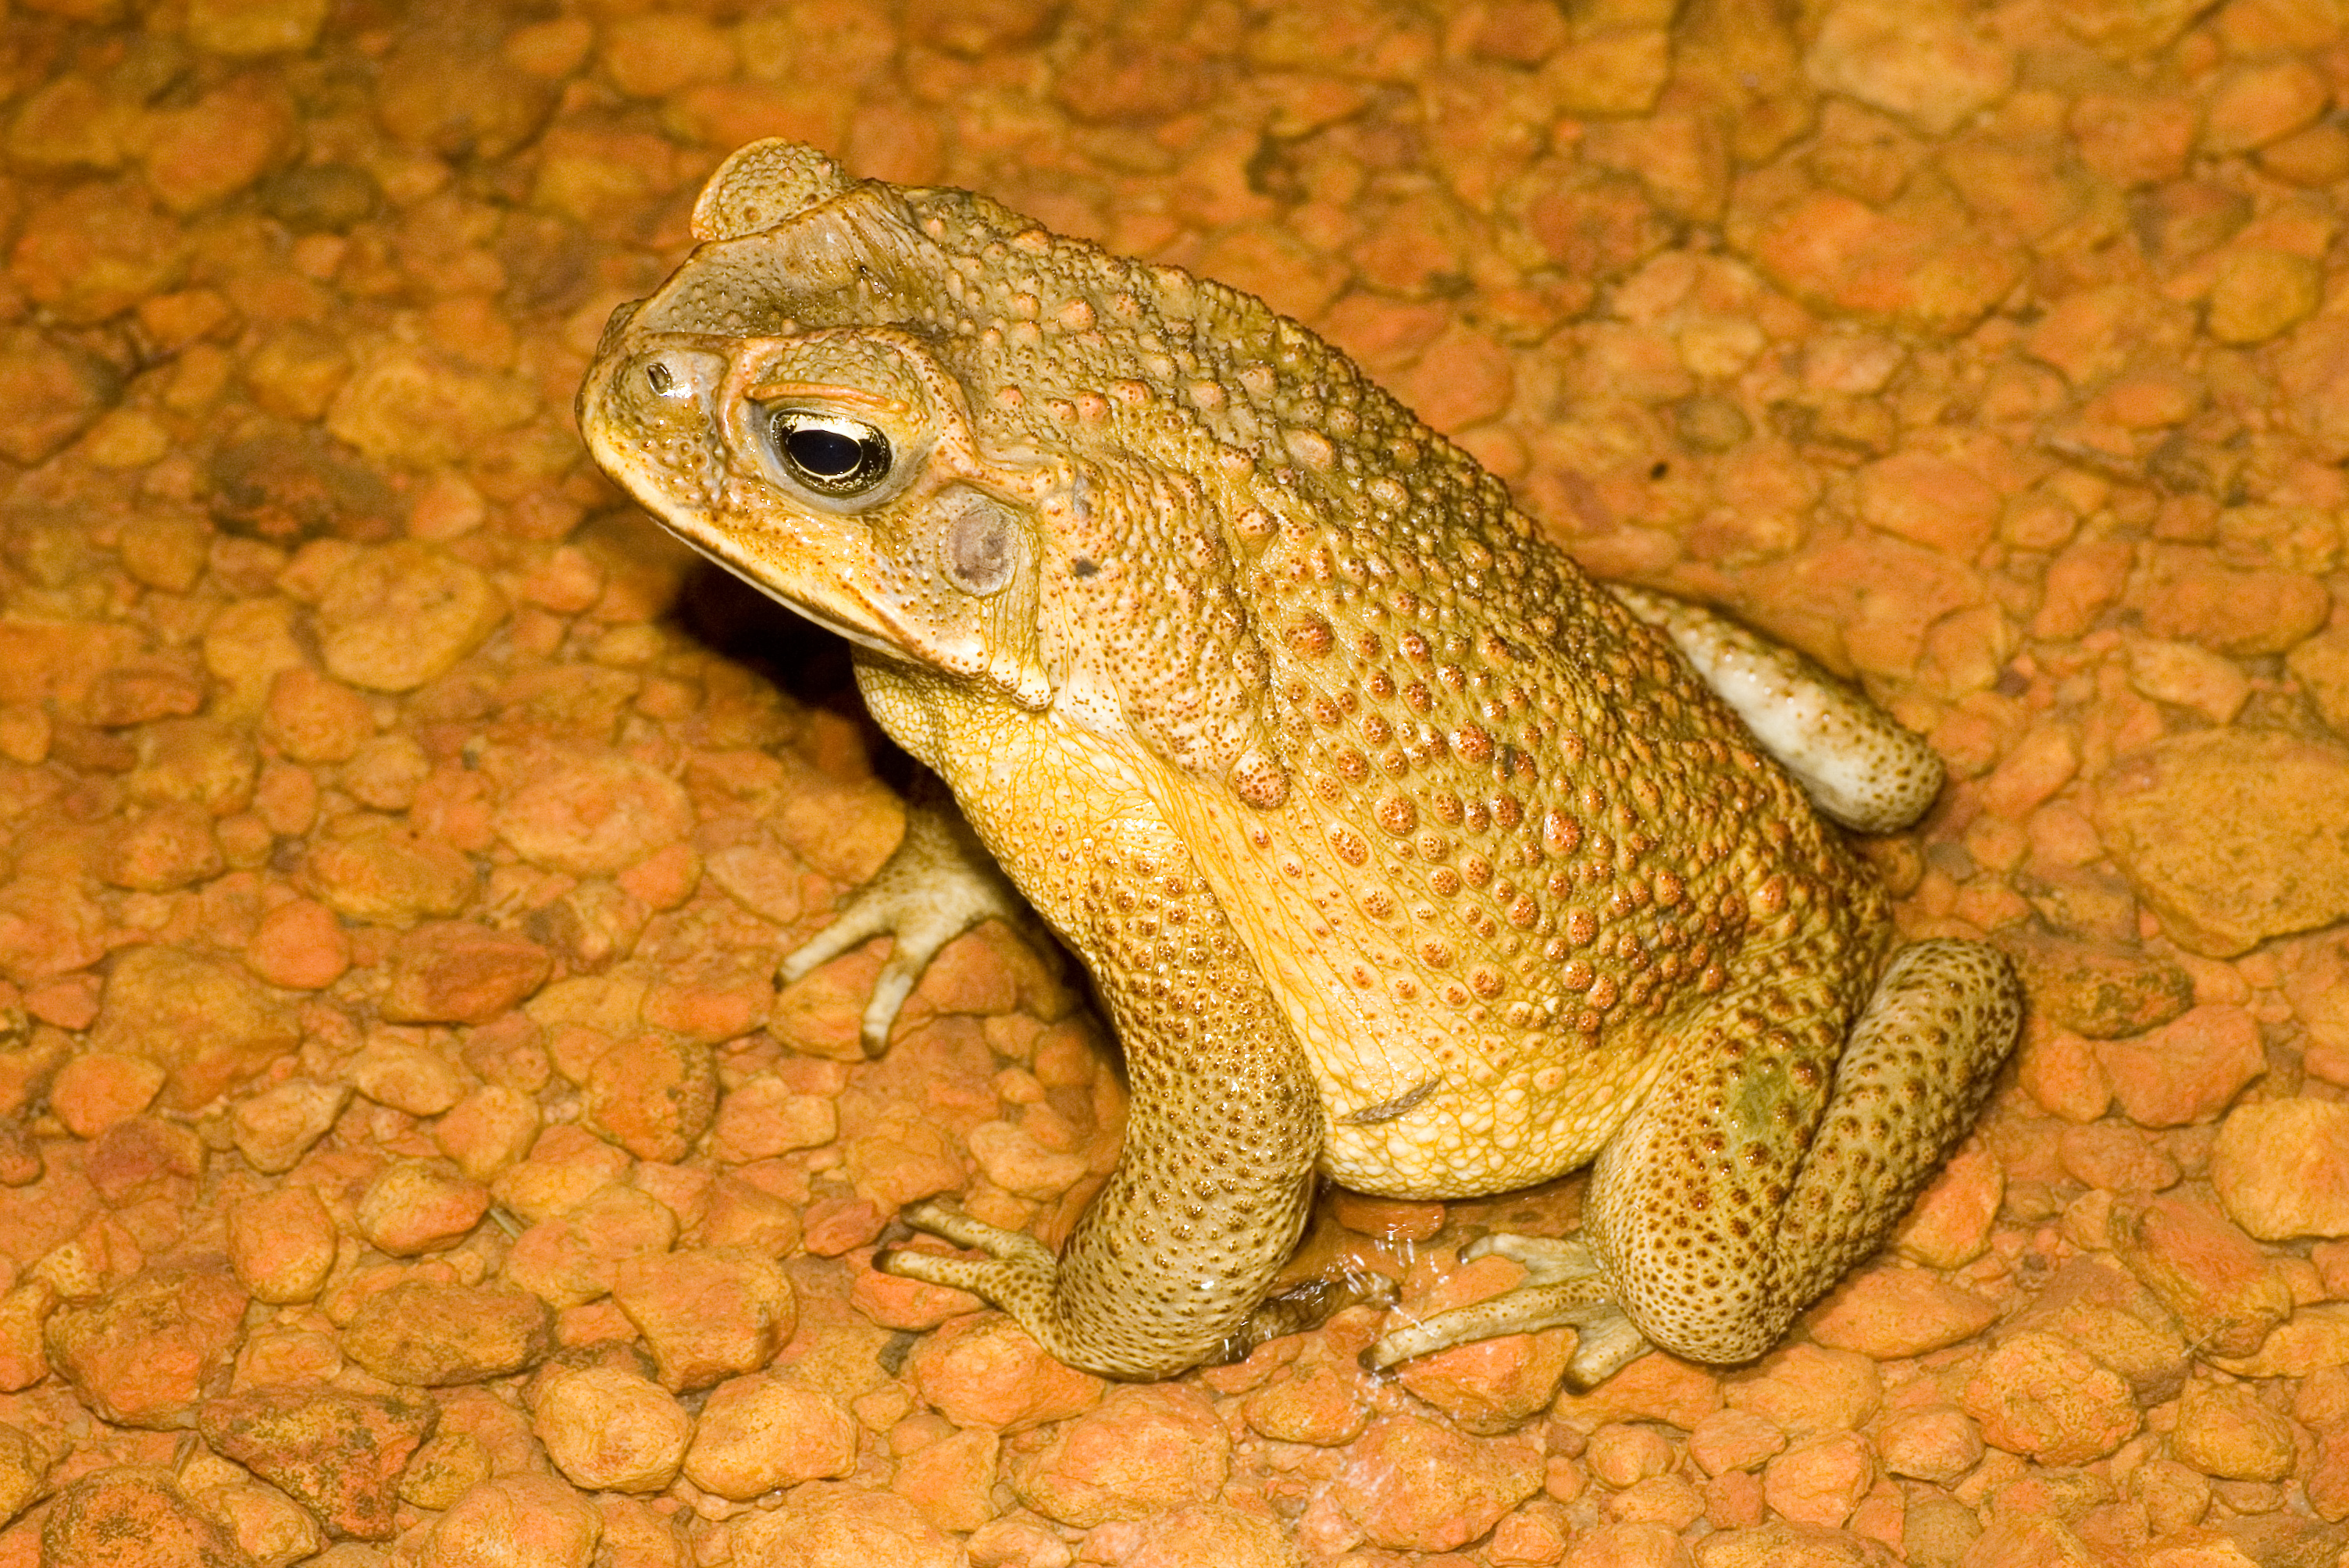 A male cane toad. Photo: David Nelson